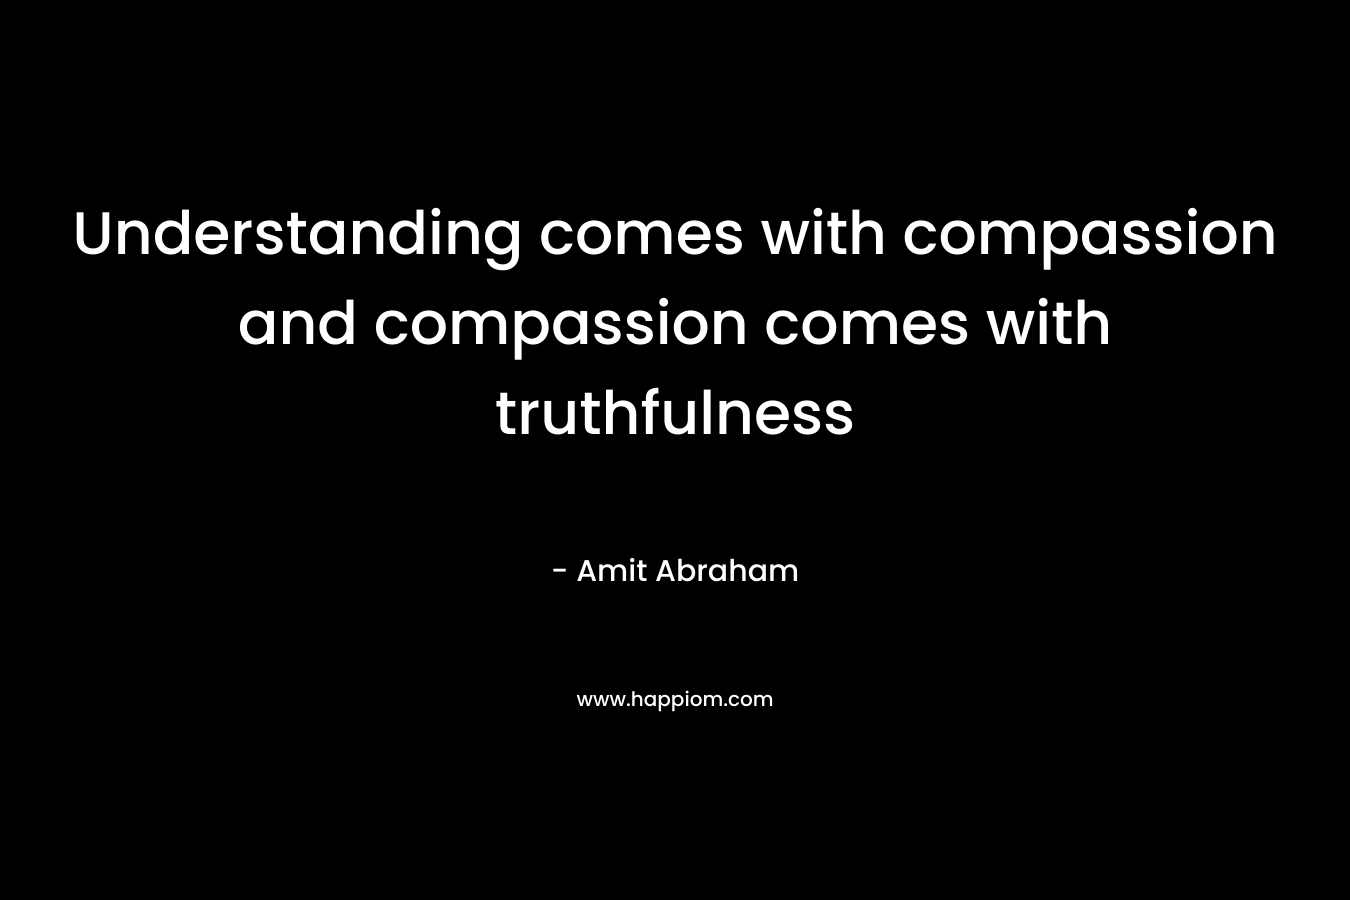 Understanding comes with compassion and compassion comes with truthfulness